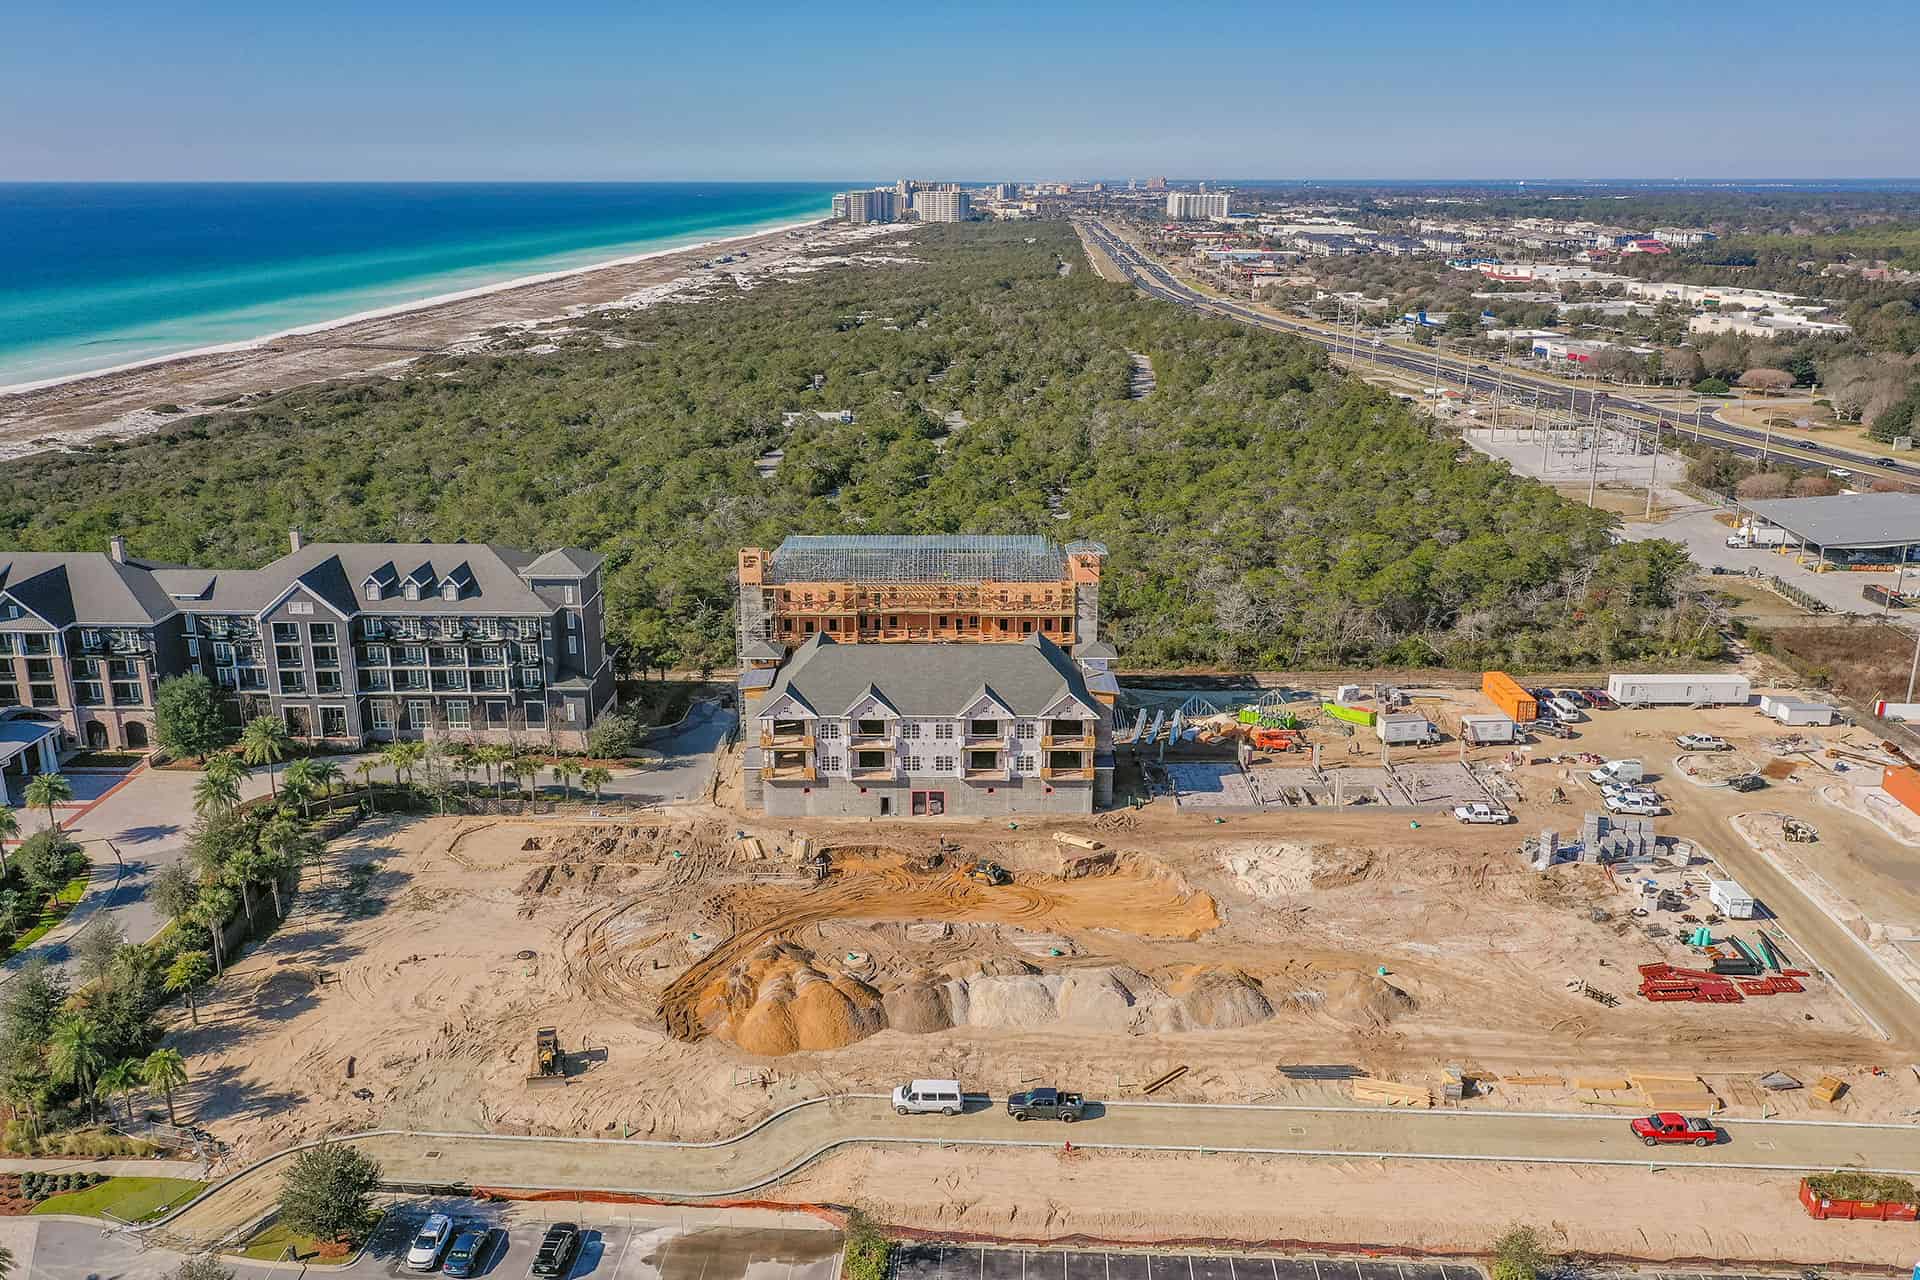 Parkside_at_Henderson_Beach_Resort_January_2021 drone photo looking west